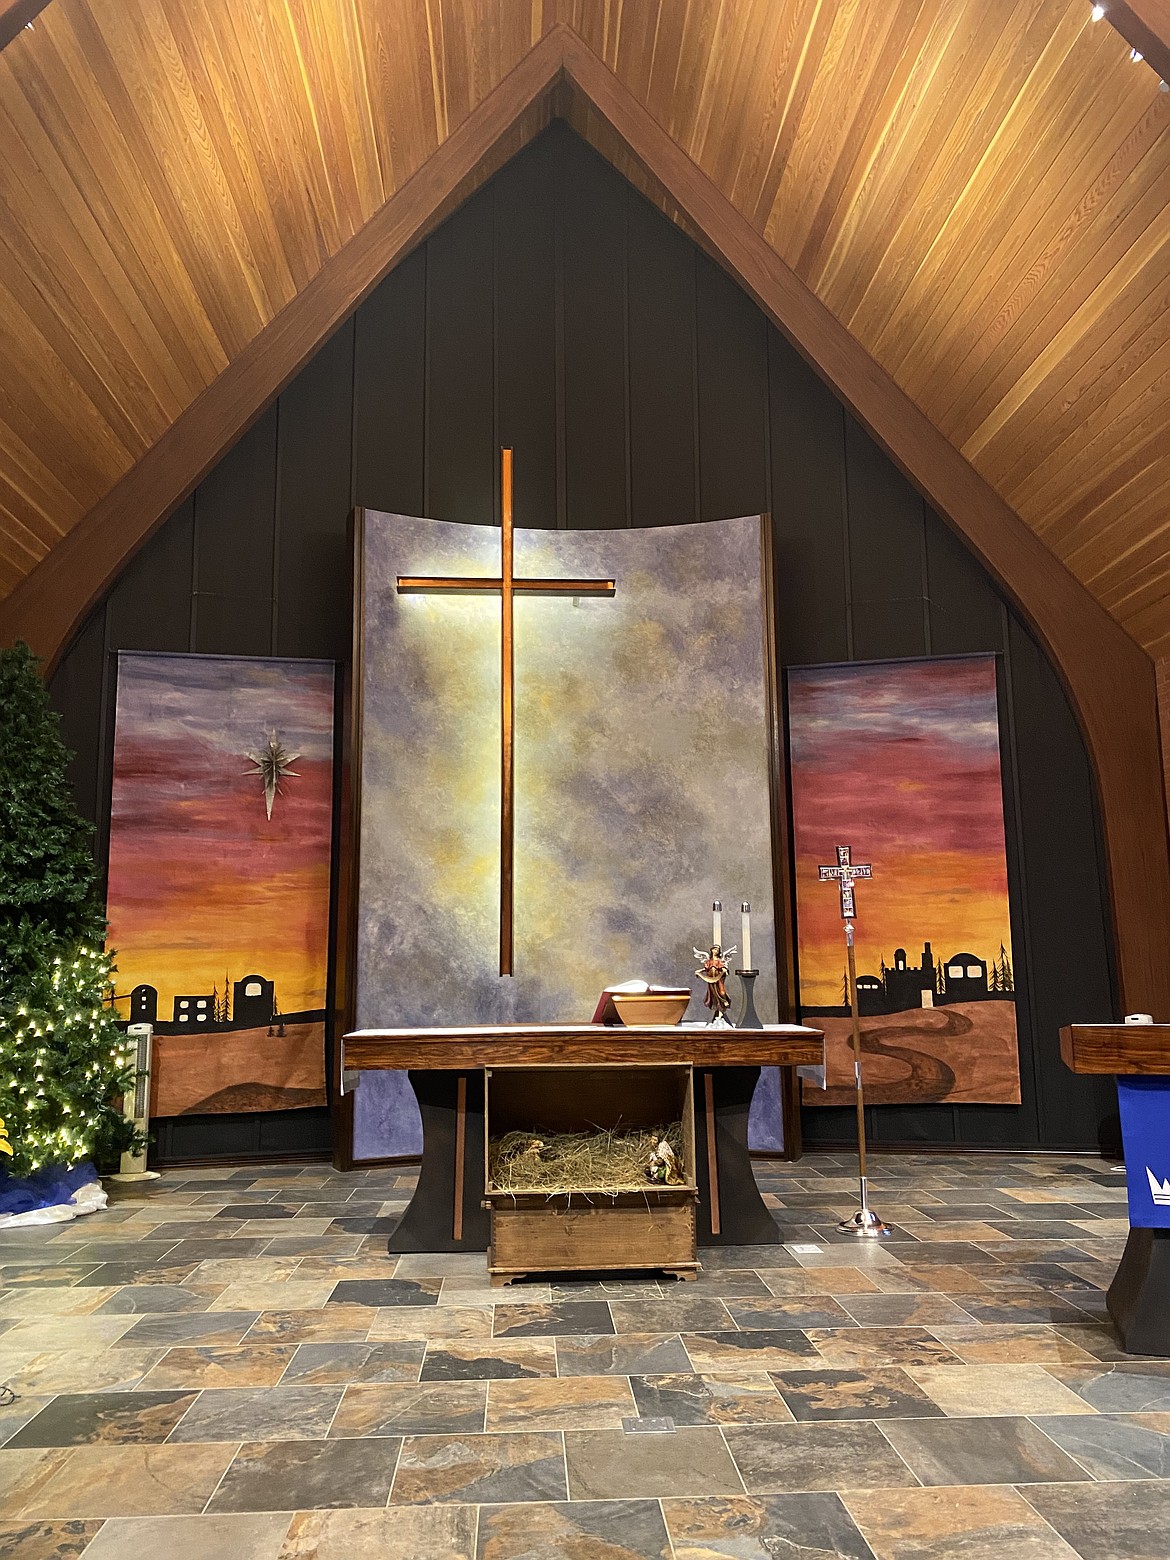 The two large, hand-painted panels created by local artist Shannon Erwin on either side of the cross, are installed each Christmas season to mark the beginning of Advent.